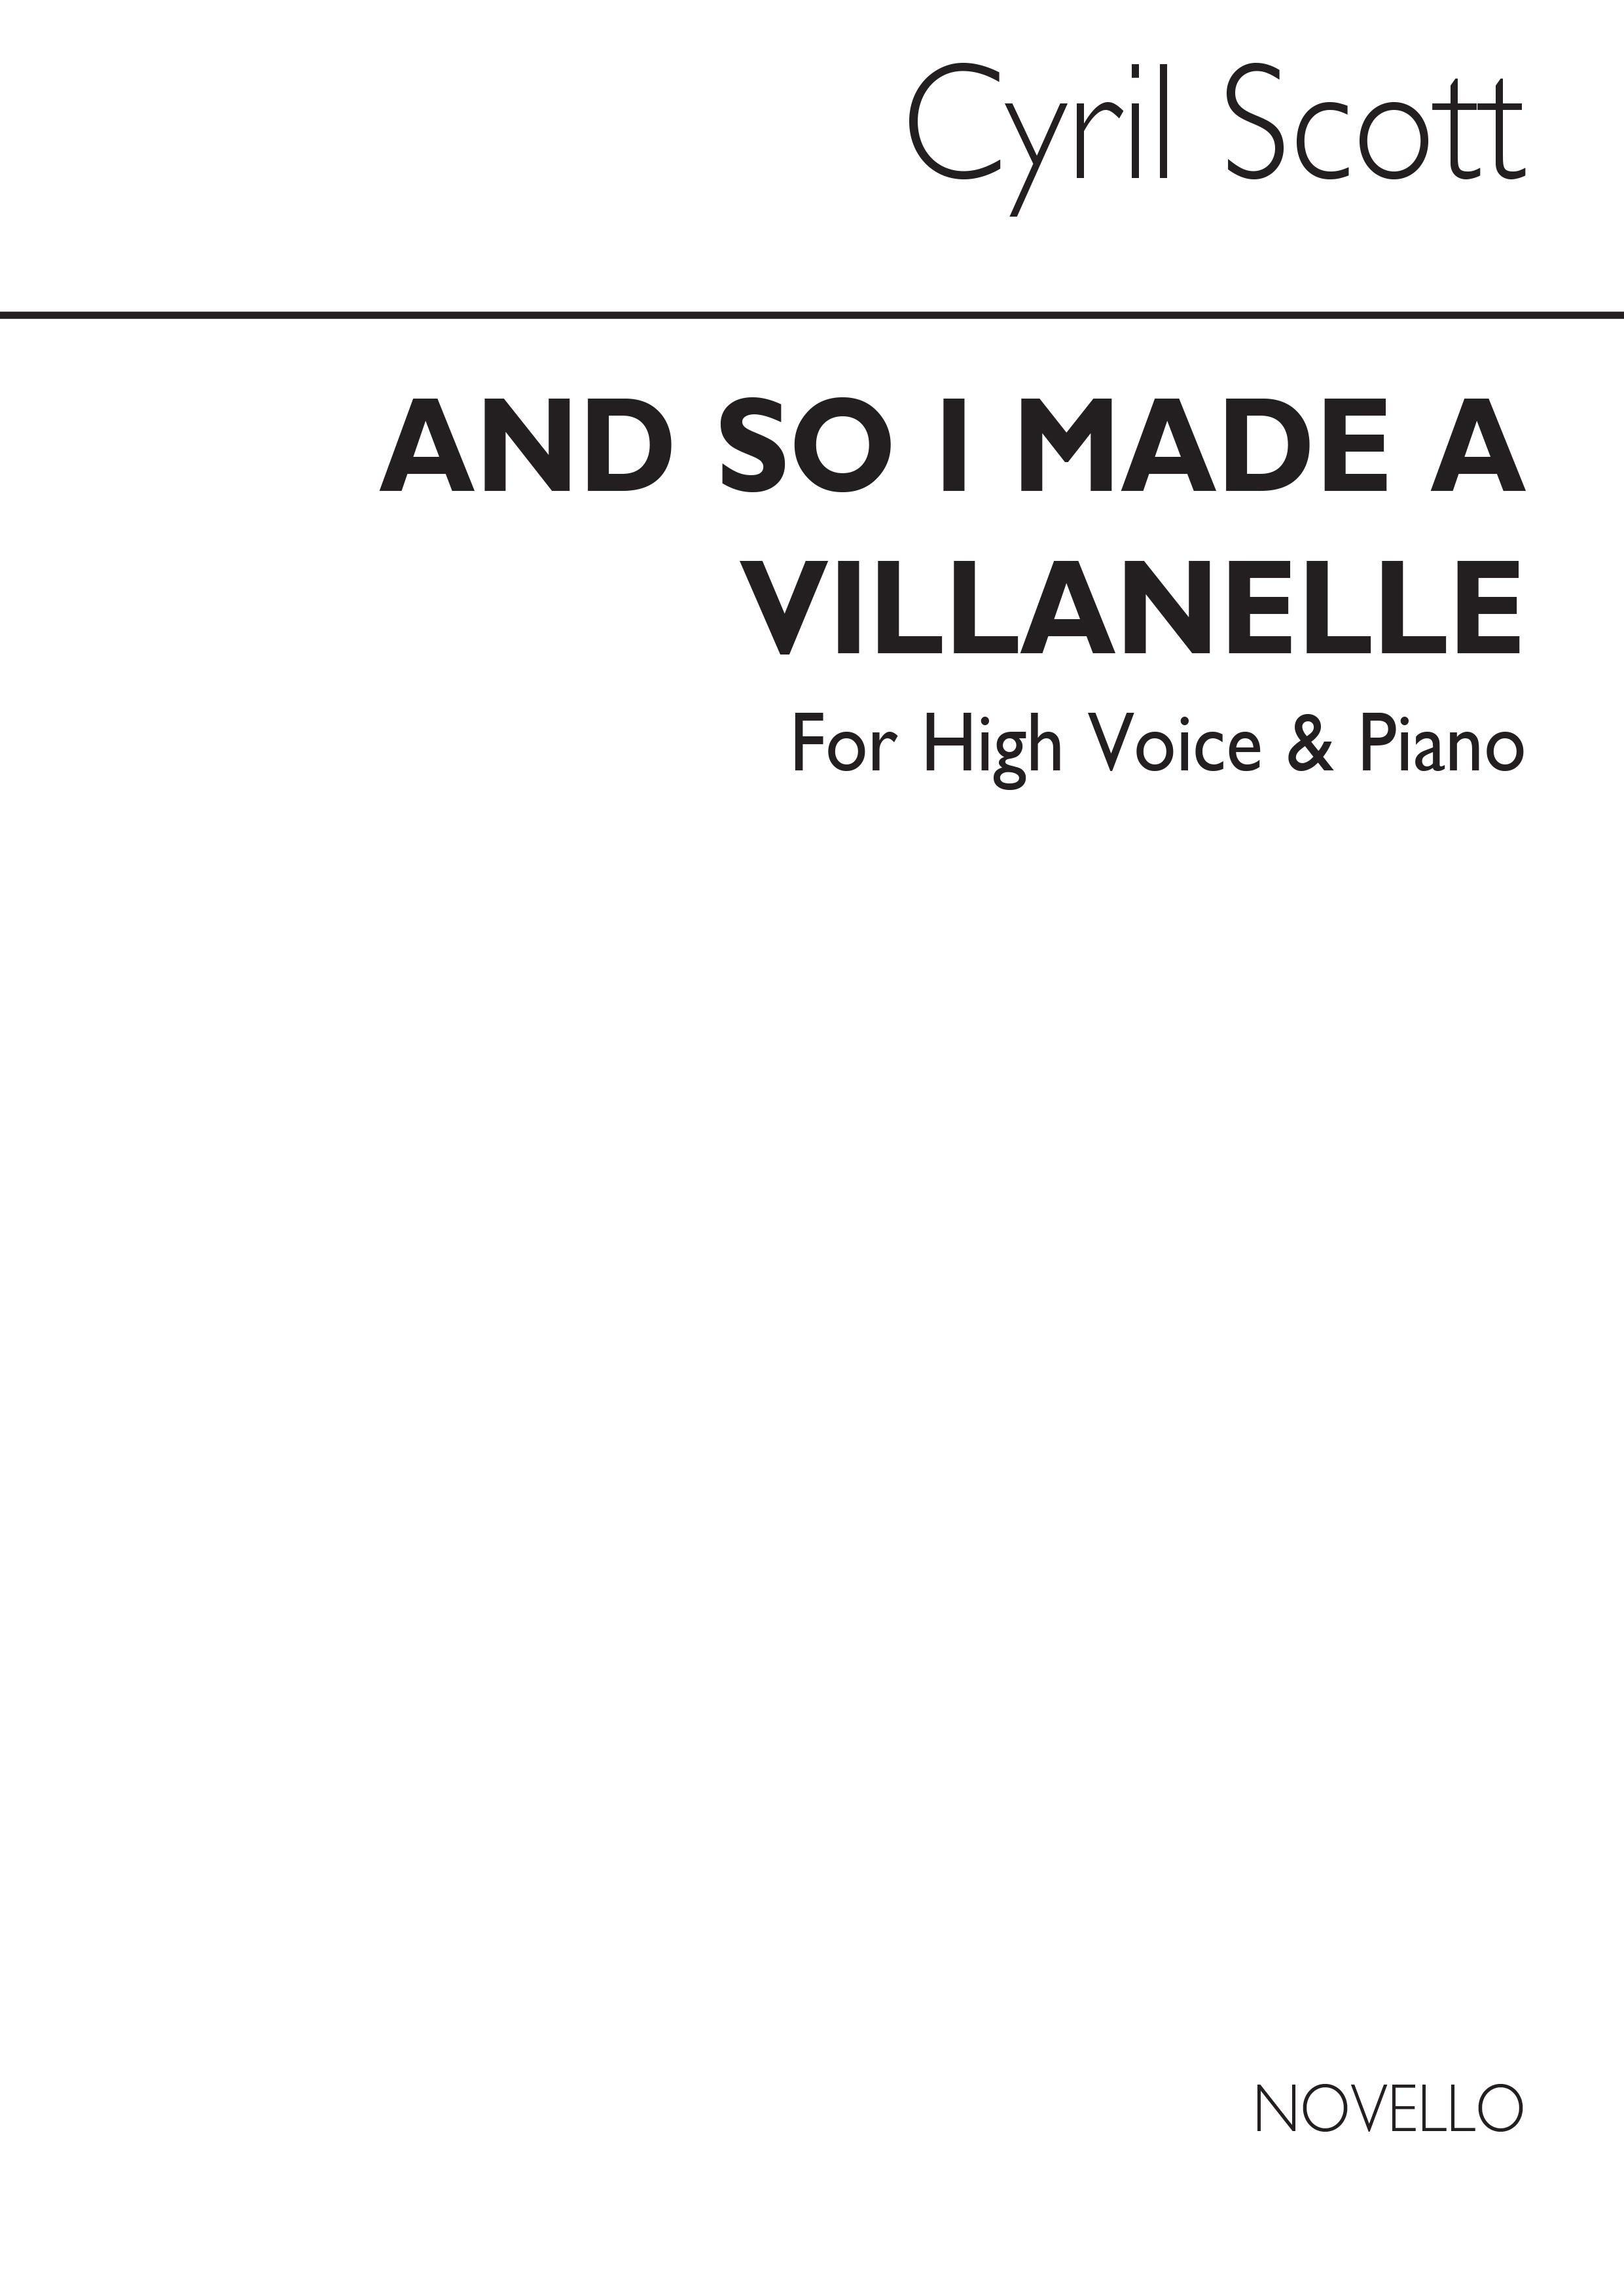 Cyril Scott: And So I Made A Villanelle-high Voice/Piano (Key-b Flat)